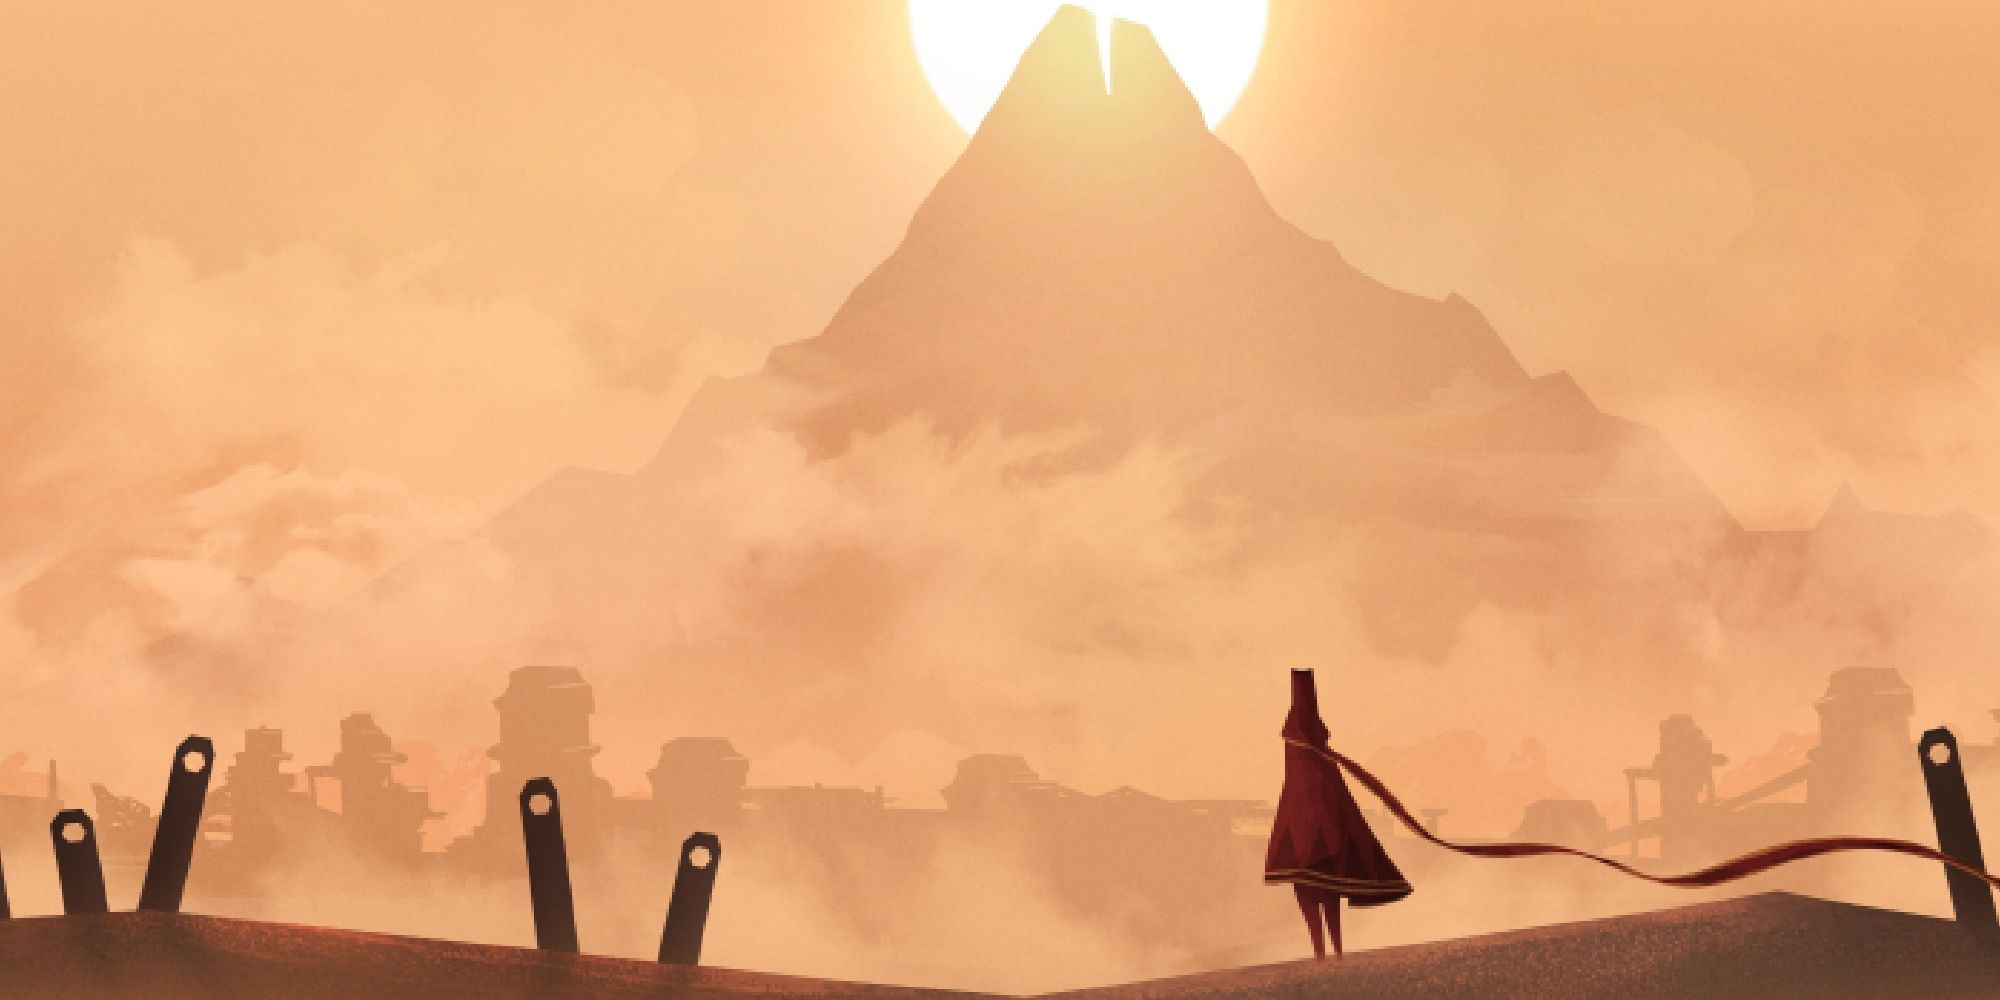 Journey - A Character In The Desert With The Sun Setting Behind A Mountain